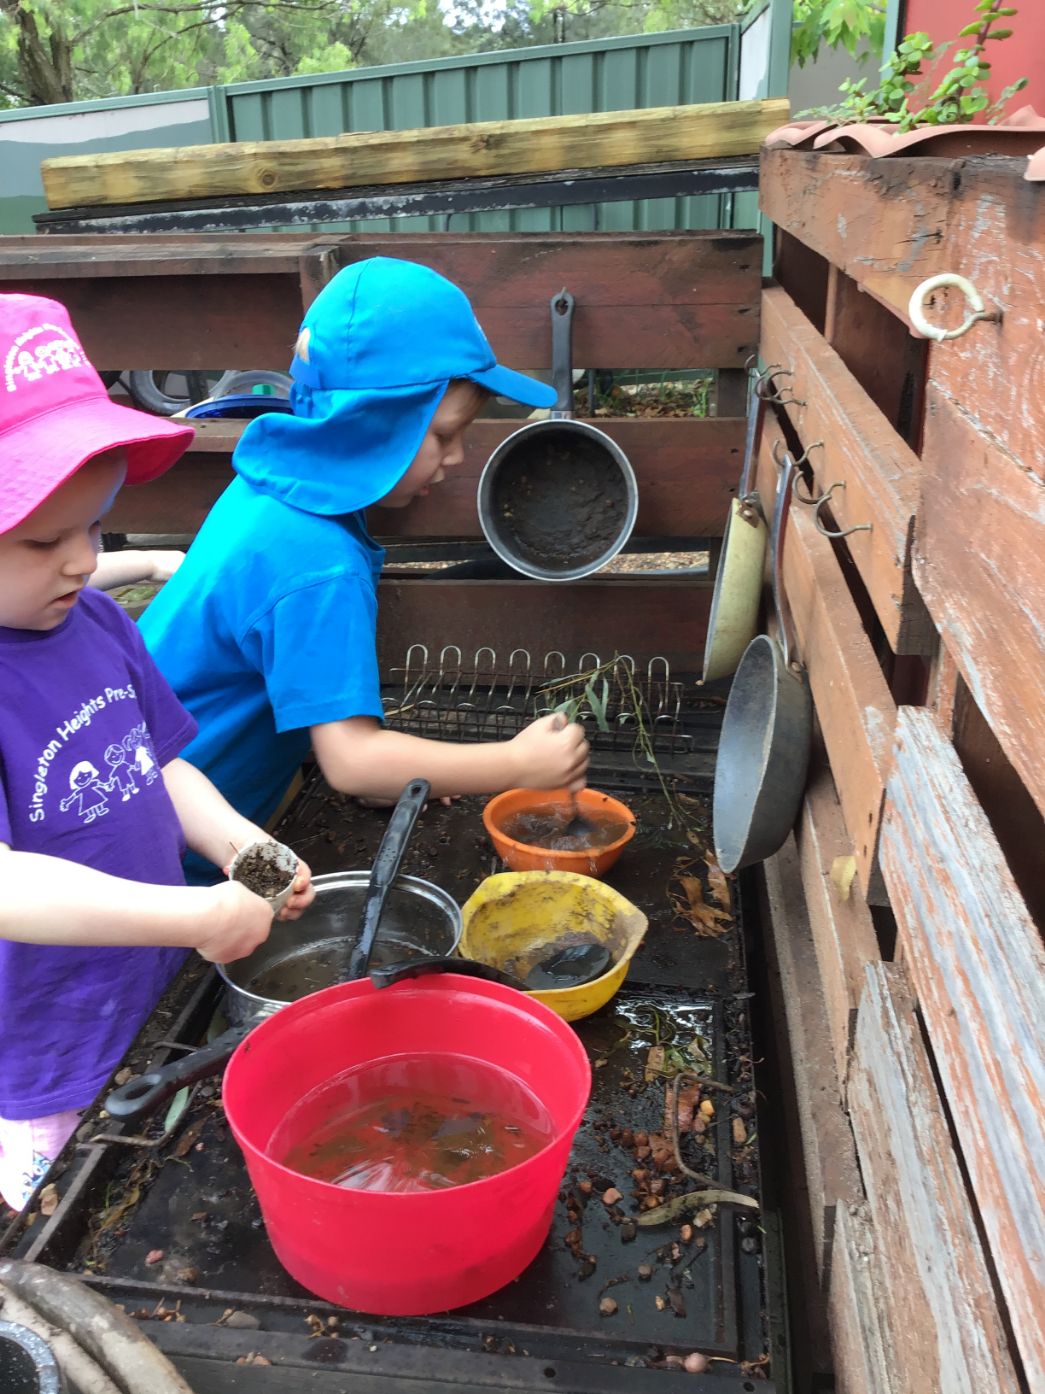 As part of childhood development, our curriculum provides opportunities for children to choose activities such as pretend cooking, that allow them to practice and develop skills spontaneously.